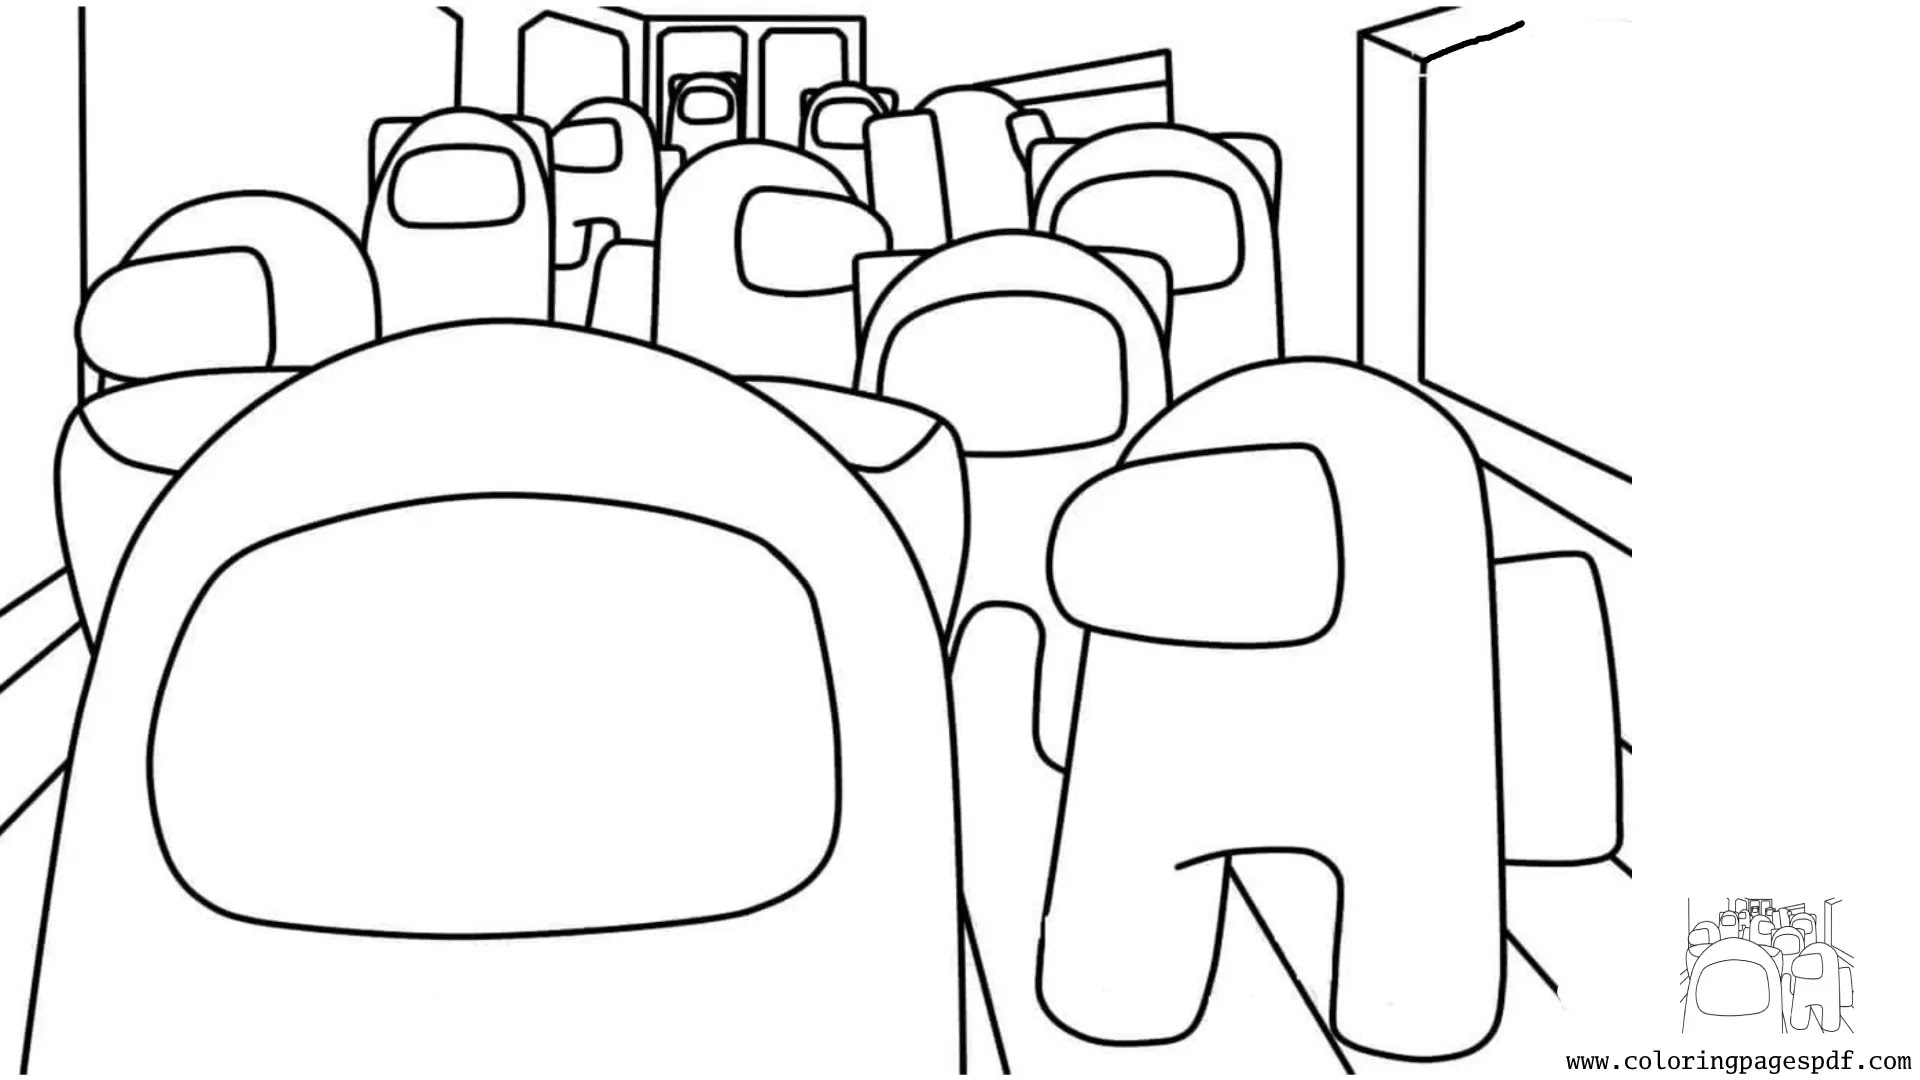 Coloring Page Of Among Us In A Train